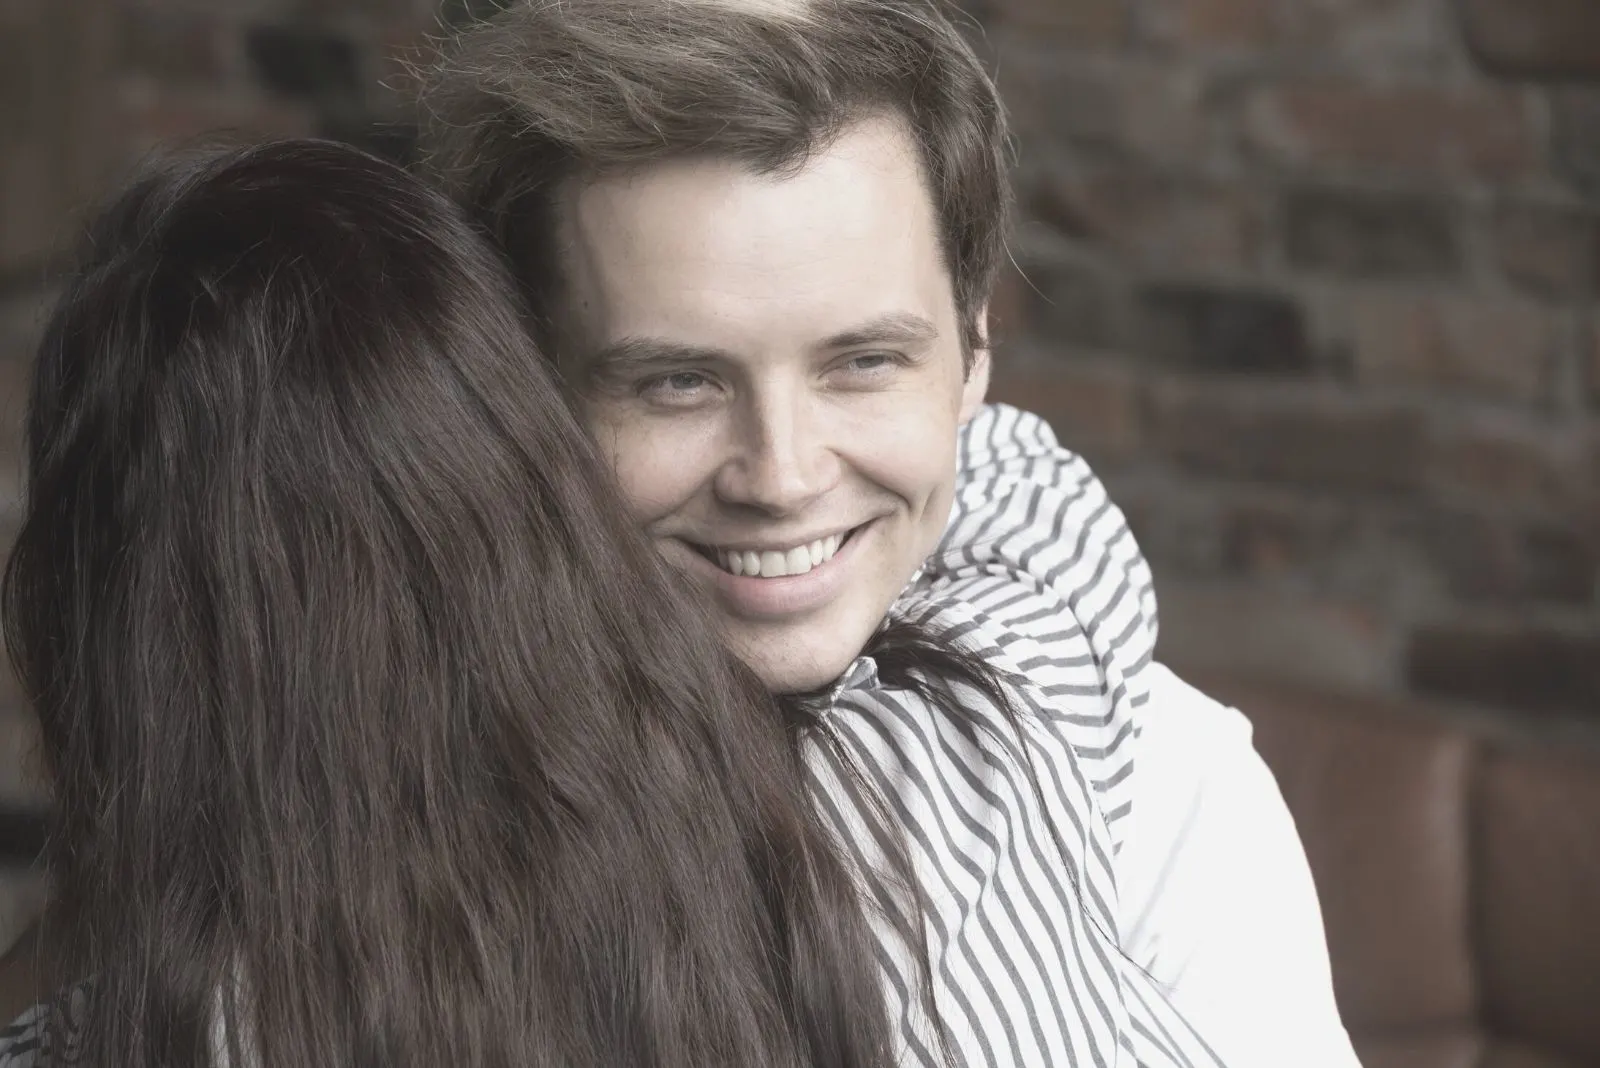 young sly liar man happily smiling embraced by a woman